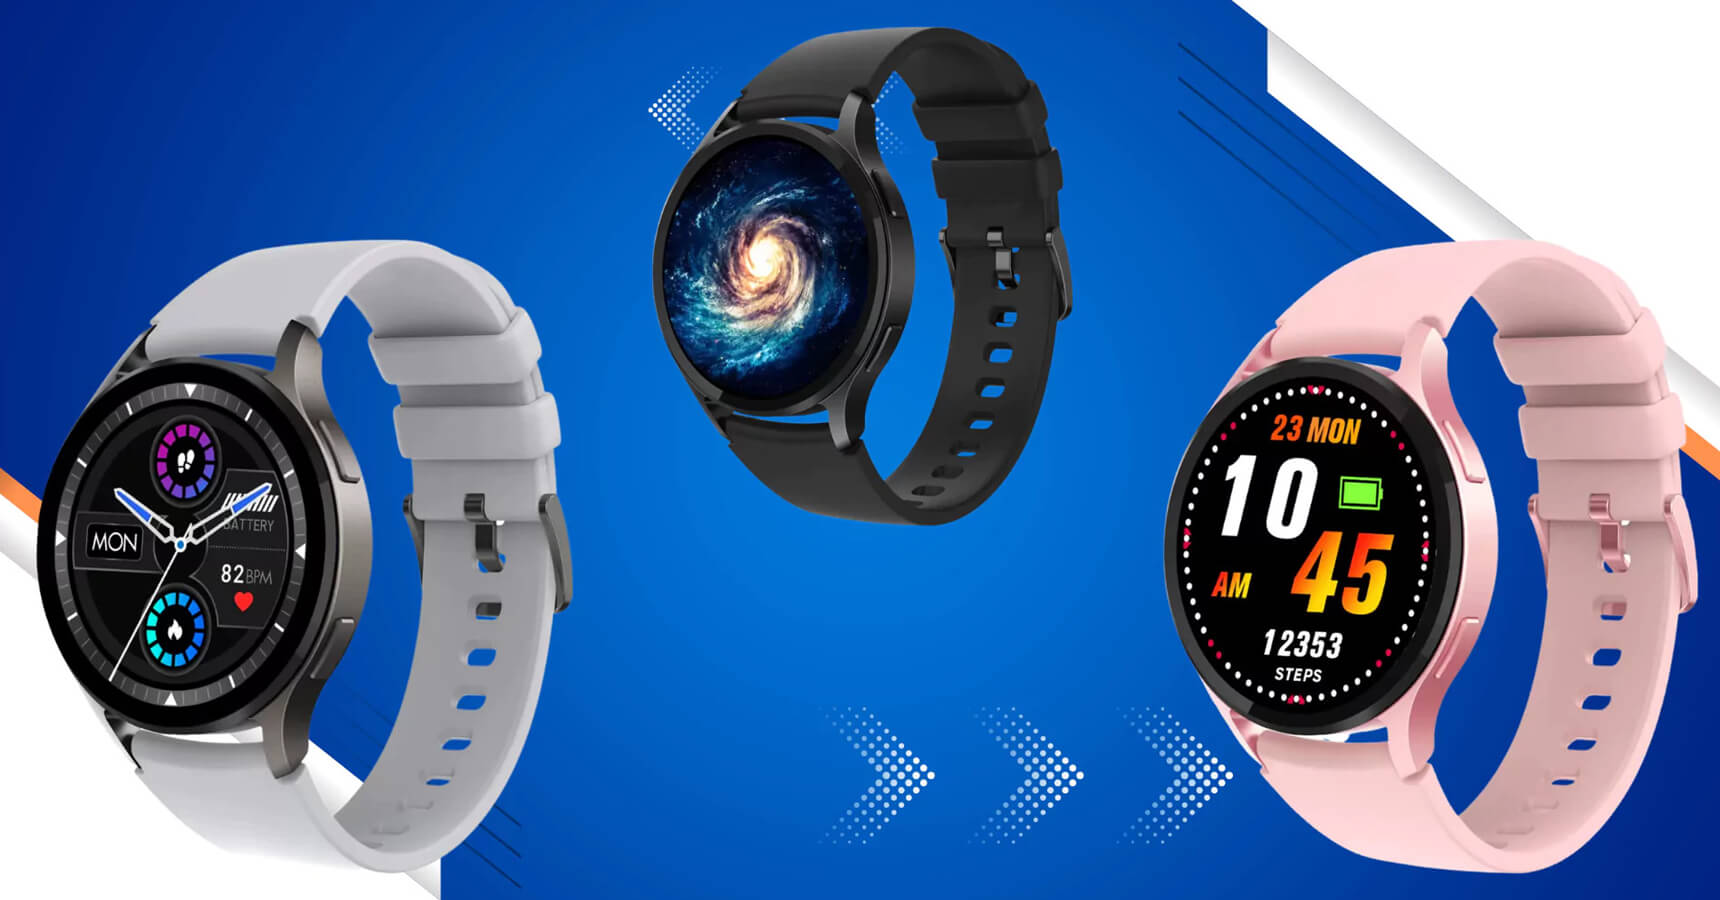 Fire Boltt Apollo Smart Watch Launched in India